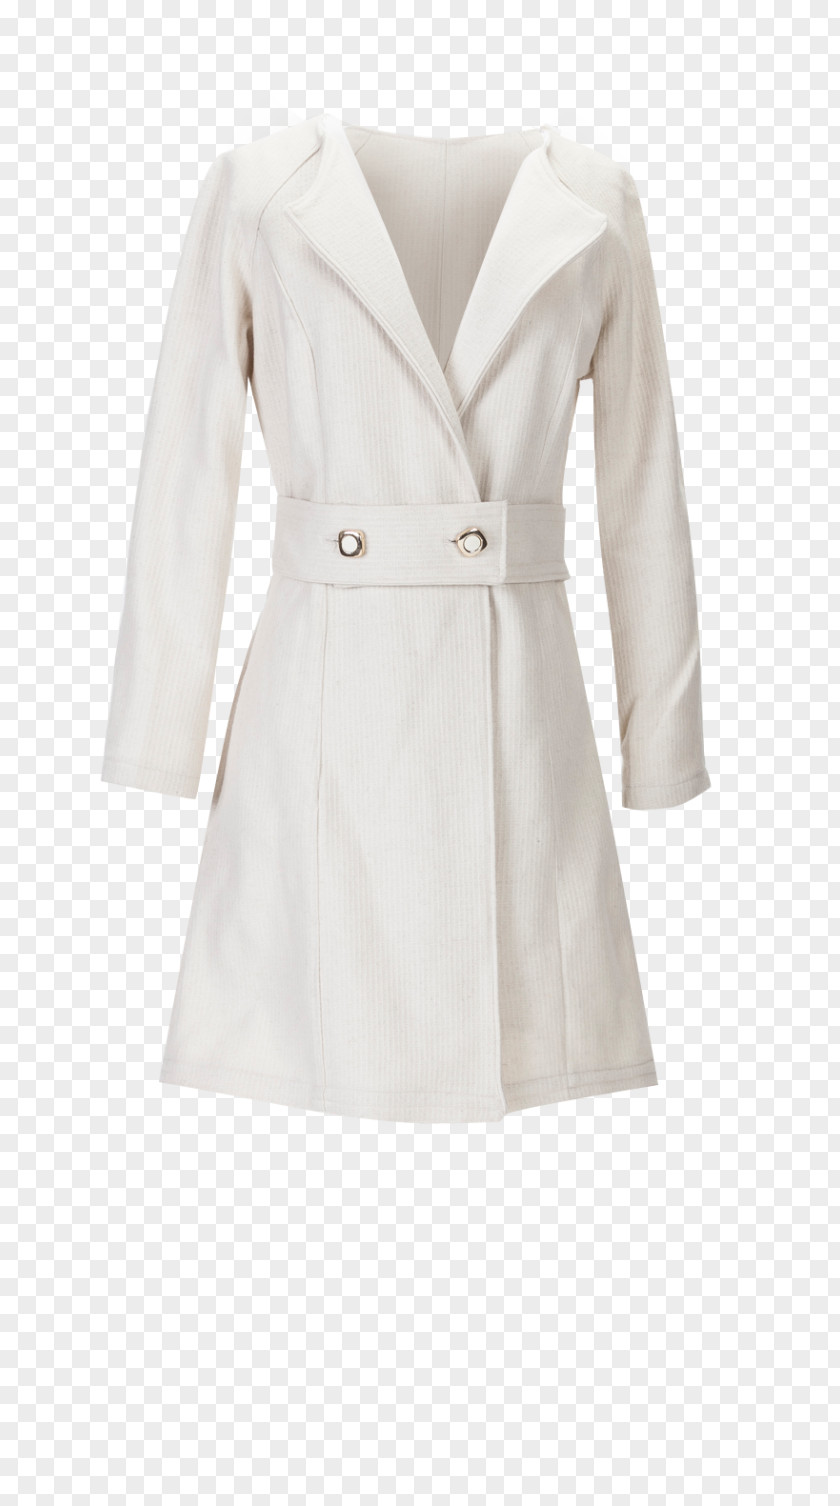 Wool Trench Coat Clothing Parka Jacket PNG